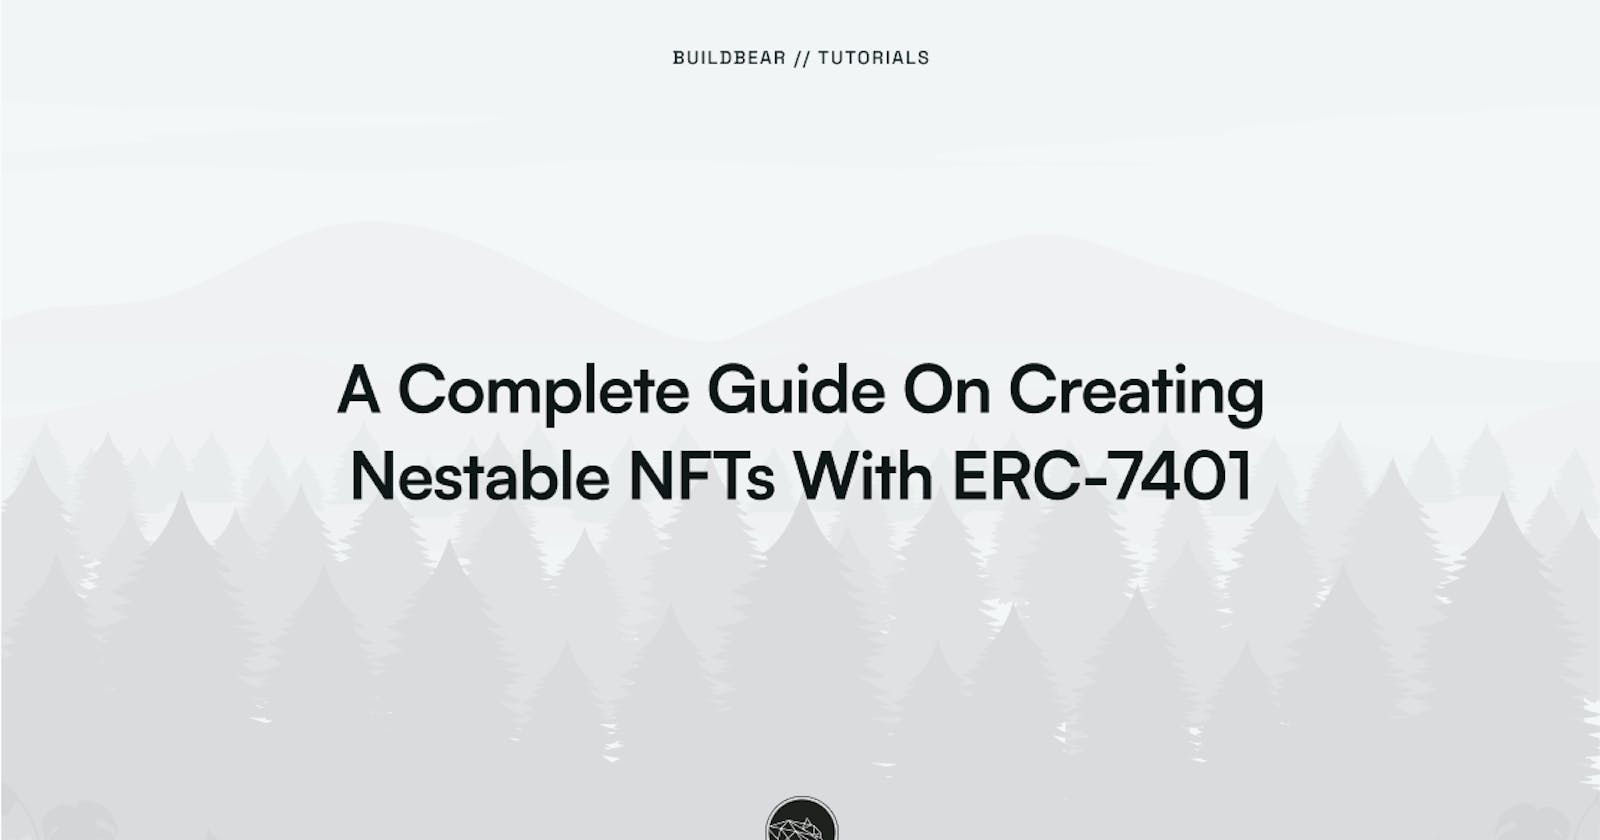 A Complete Guide On Creating Nestable NFTs with ERC-7401